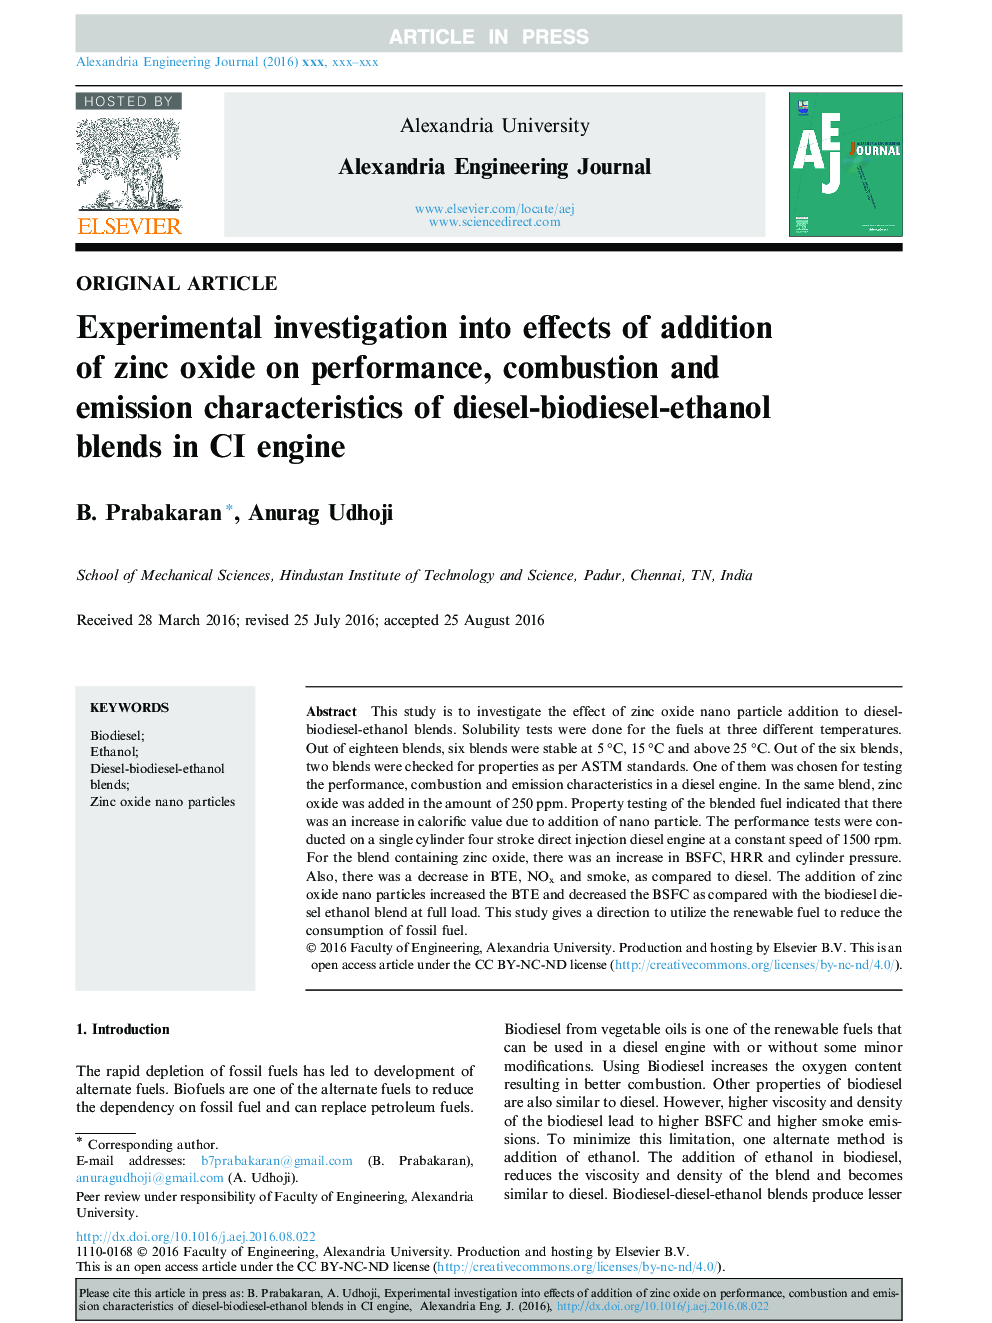 Experimental investigation into effects of addition of zinc oxide on performance, combustion and emission characteristics of diesel-biodiesel-ethanol blends in CI engine